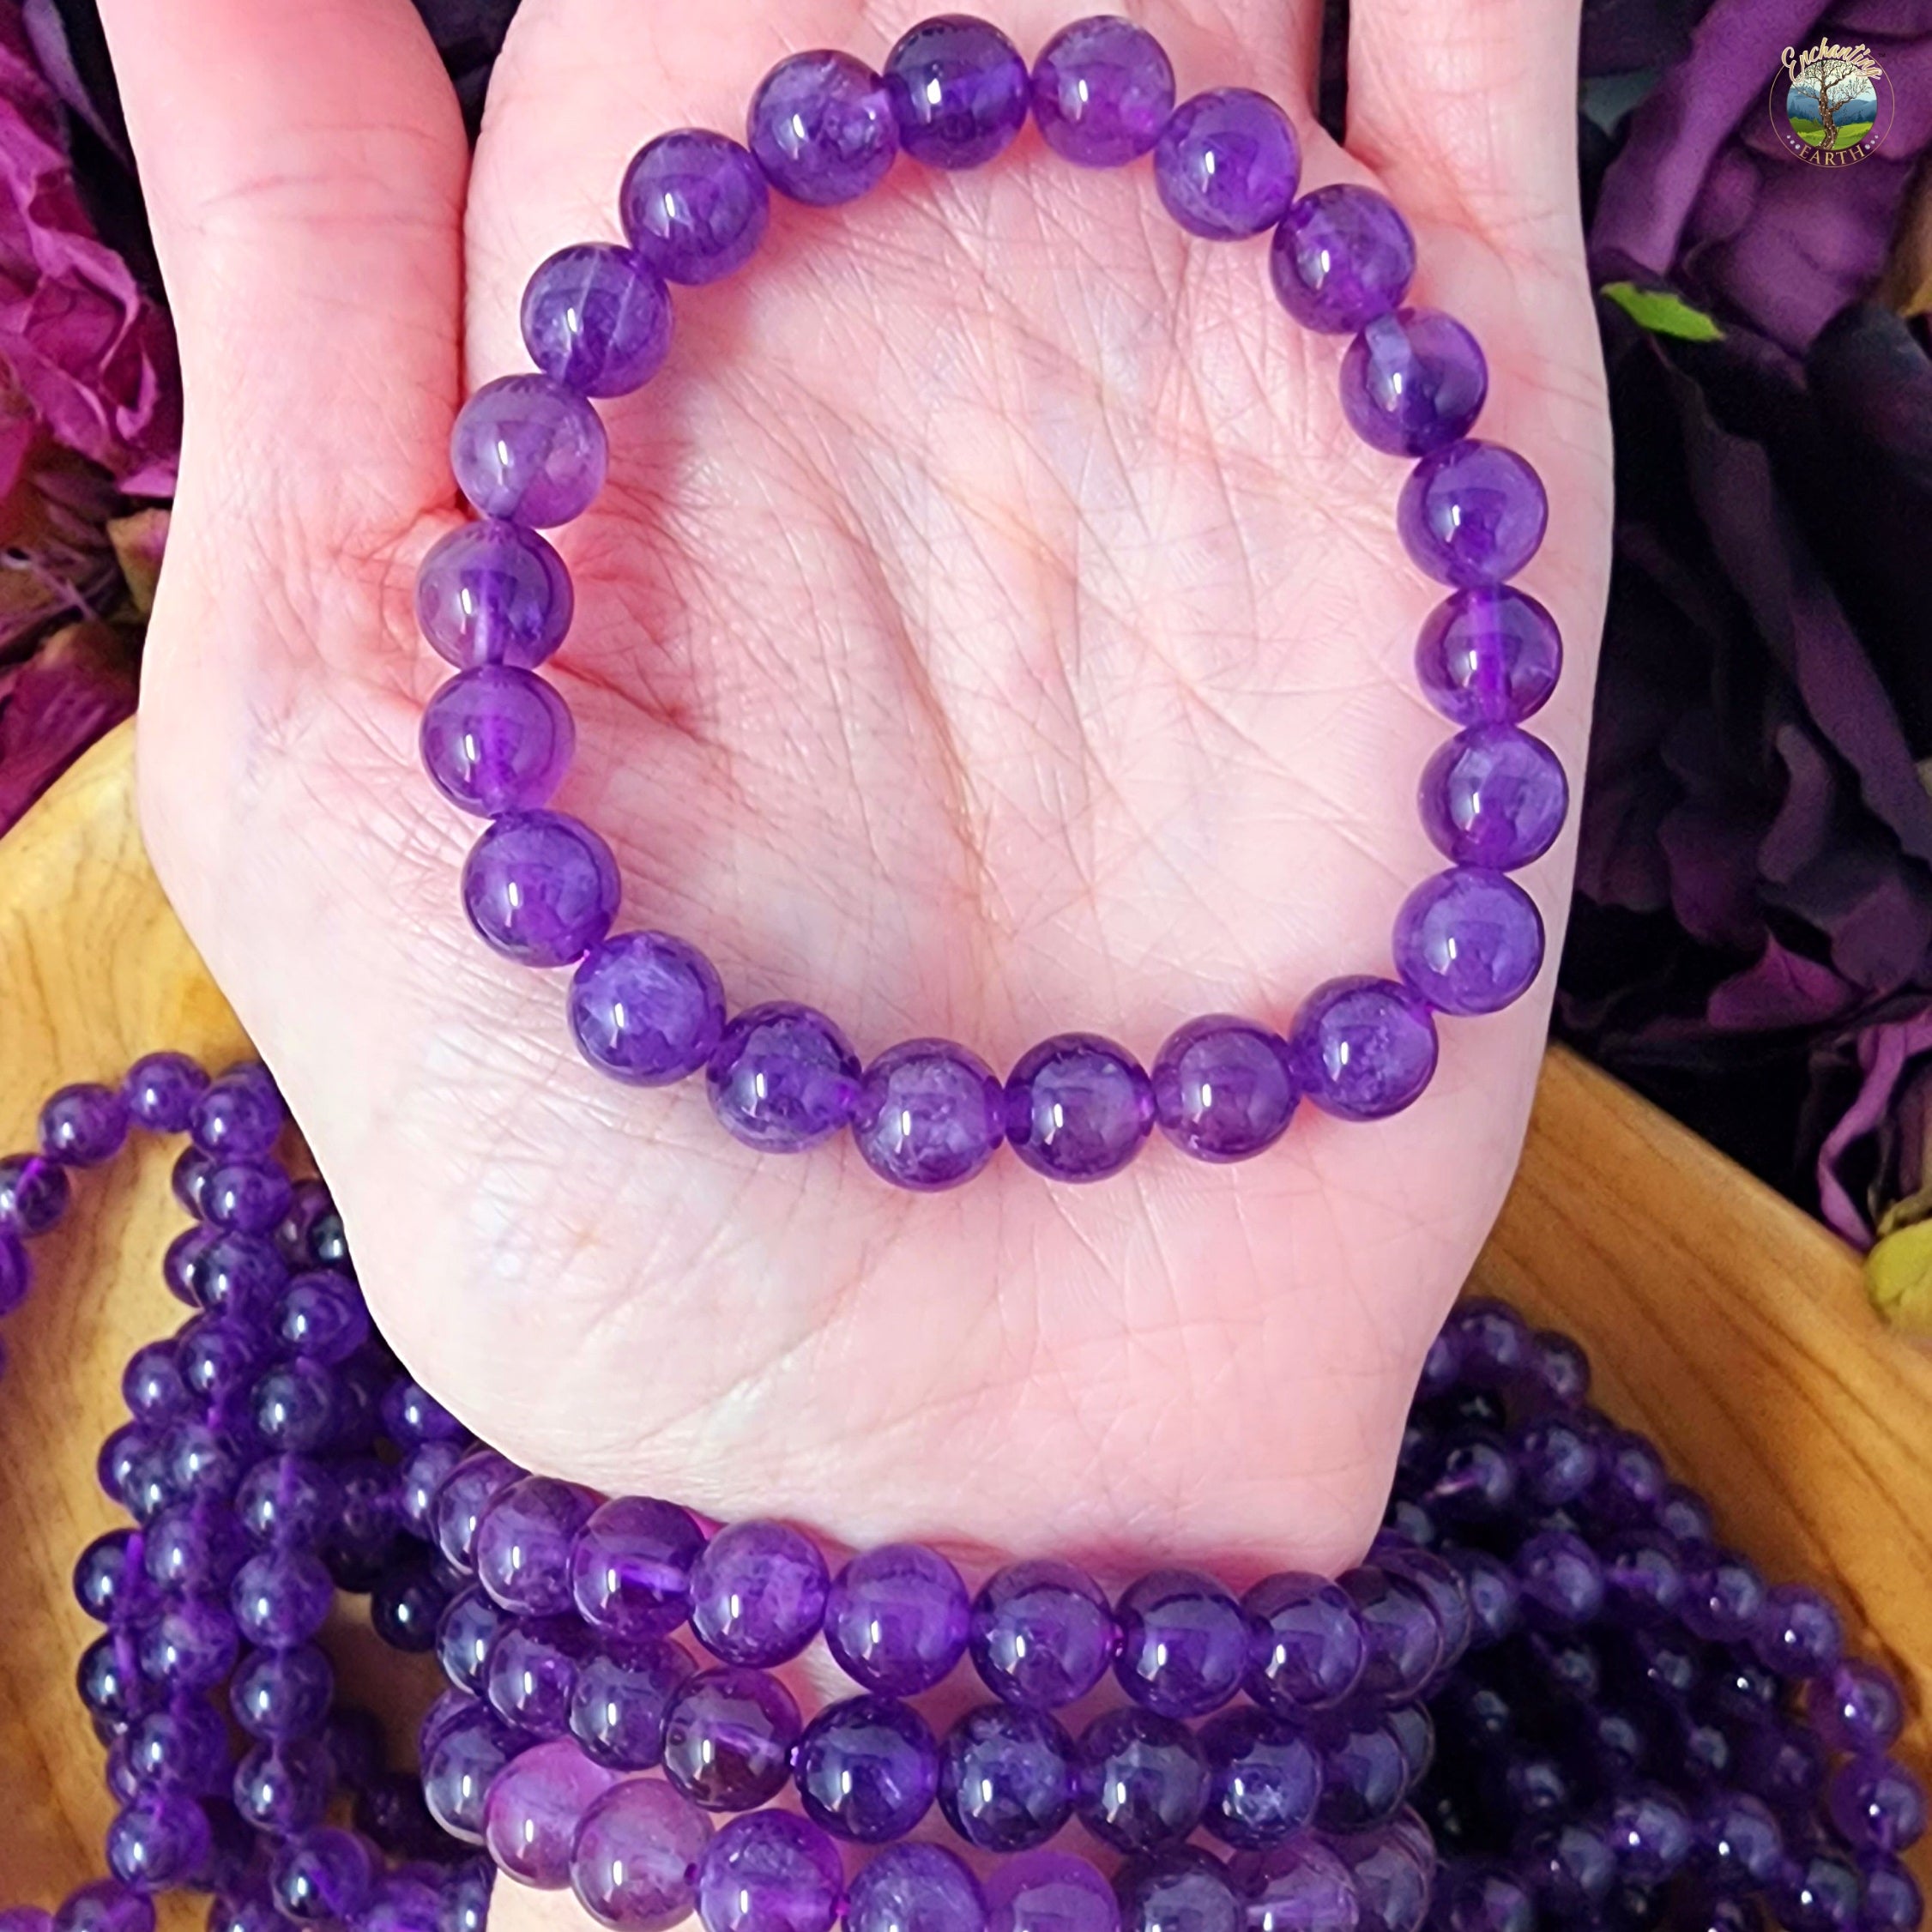 Amethyst Bracelet for Intuition, Connection with the Divine and Sobriety